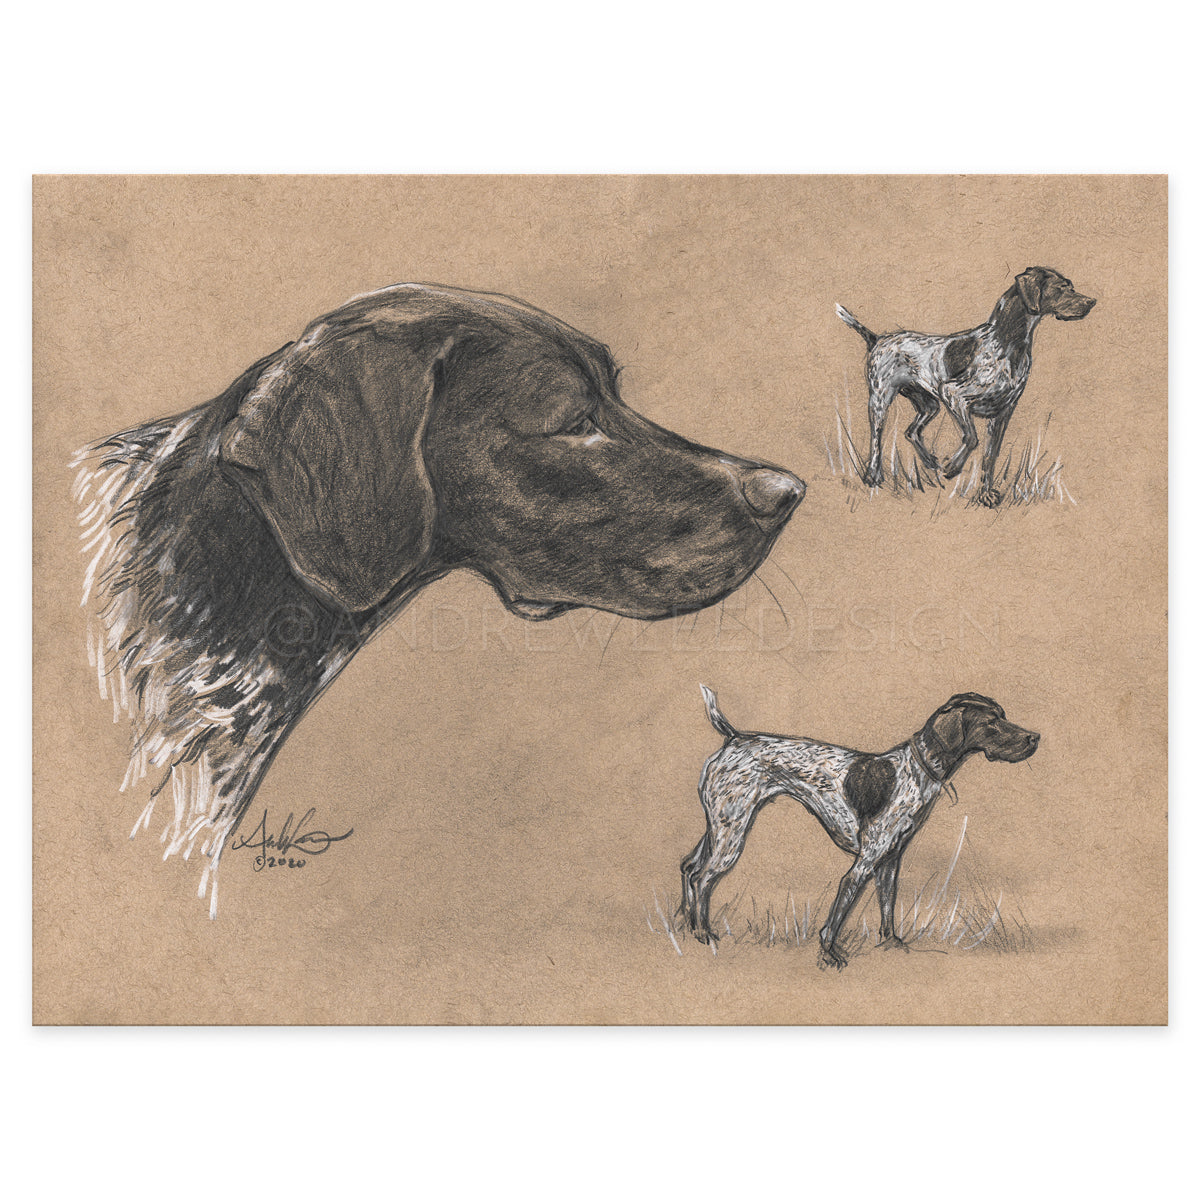 German Shorthaired Pointer Study, 9x12" Print